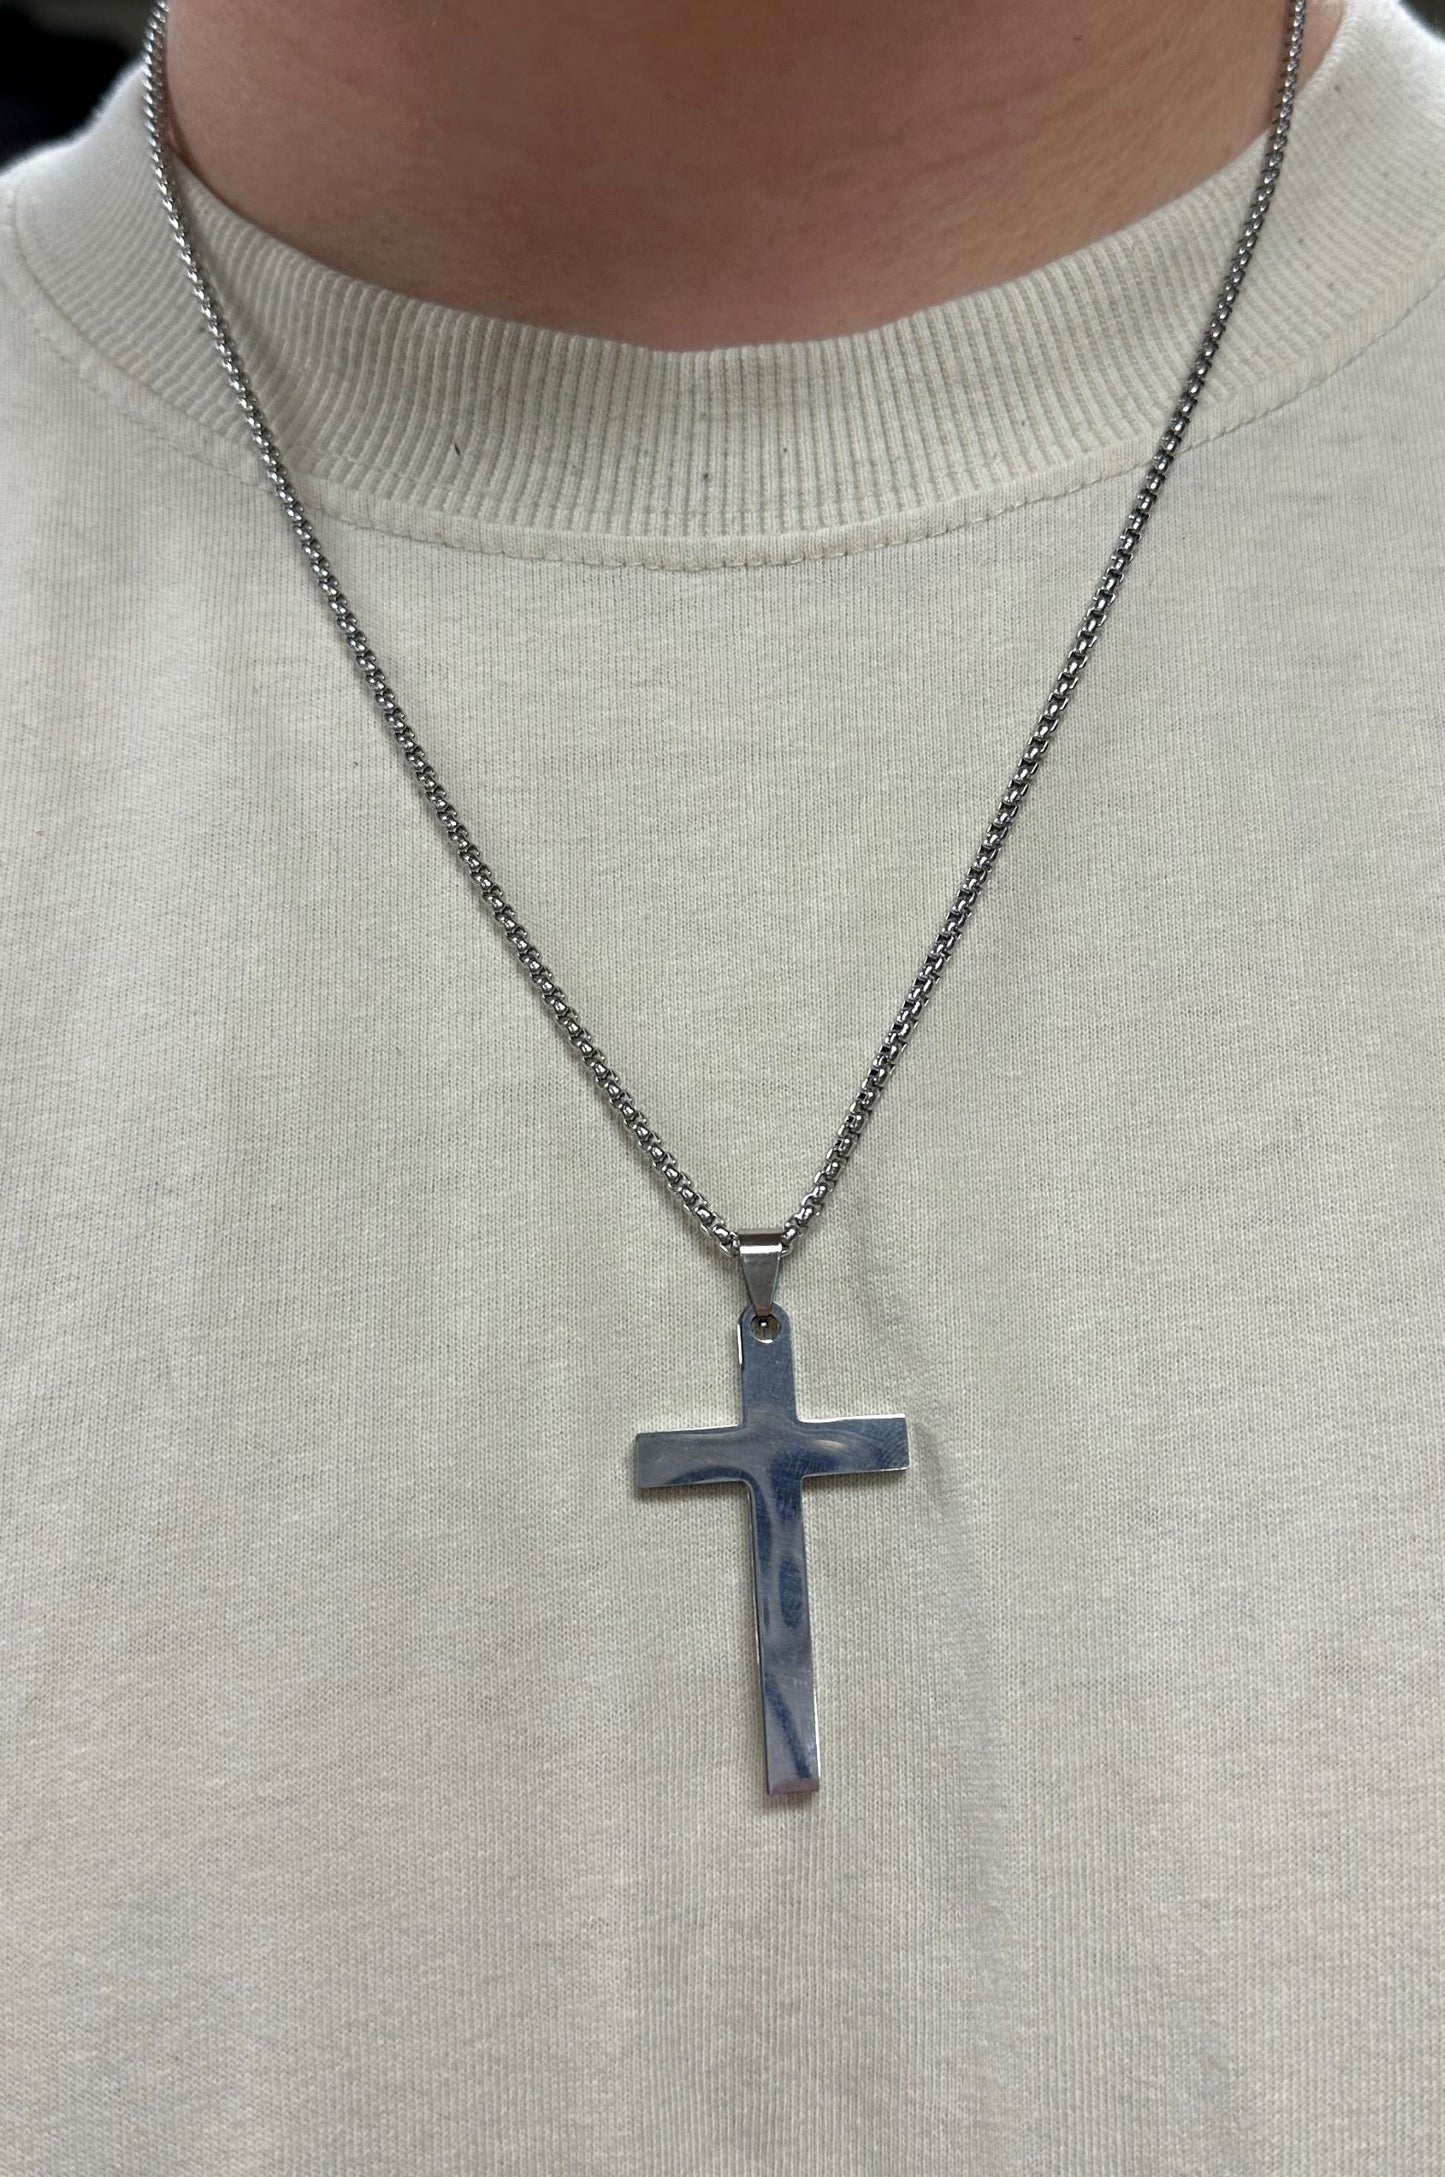 Necklace - Cross Shaped Love (Silver)